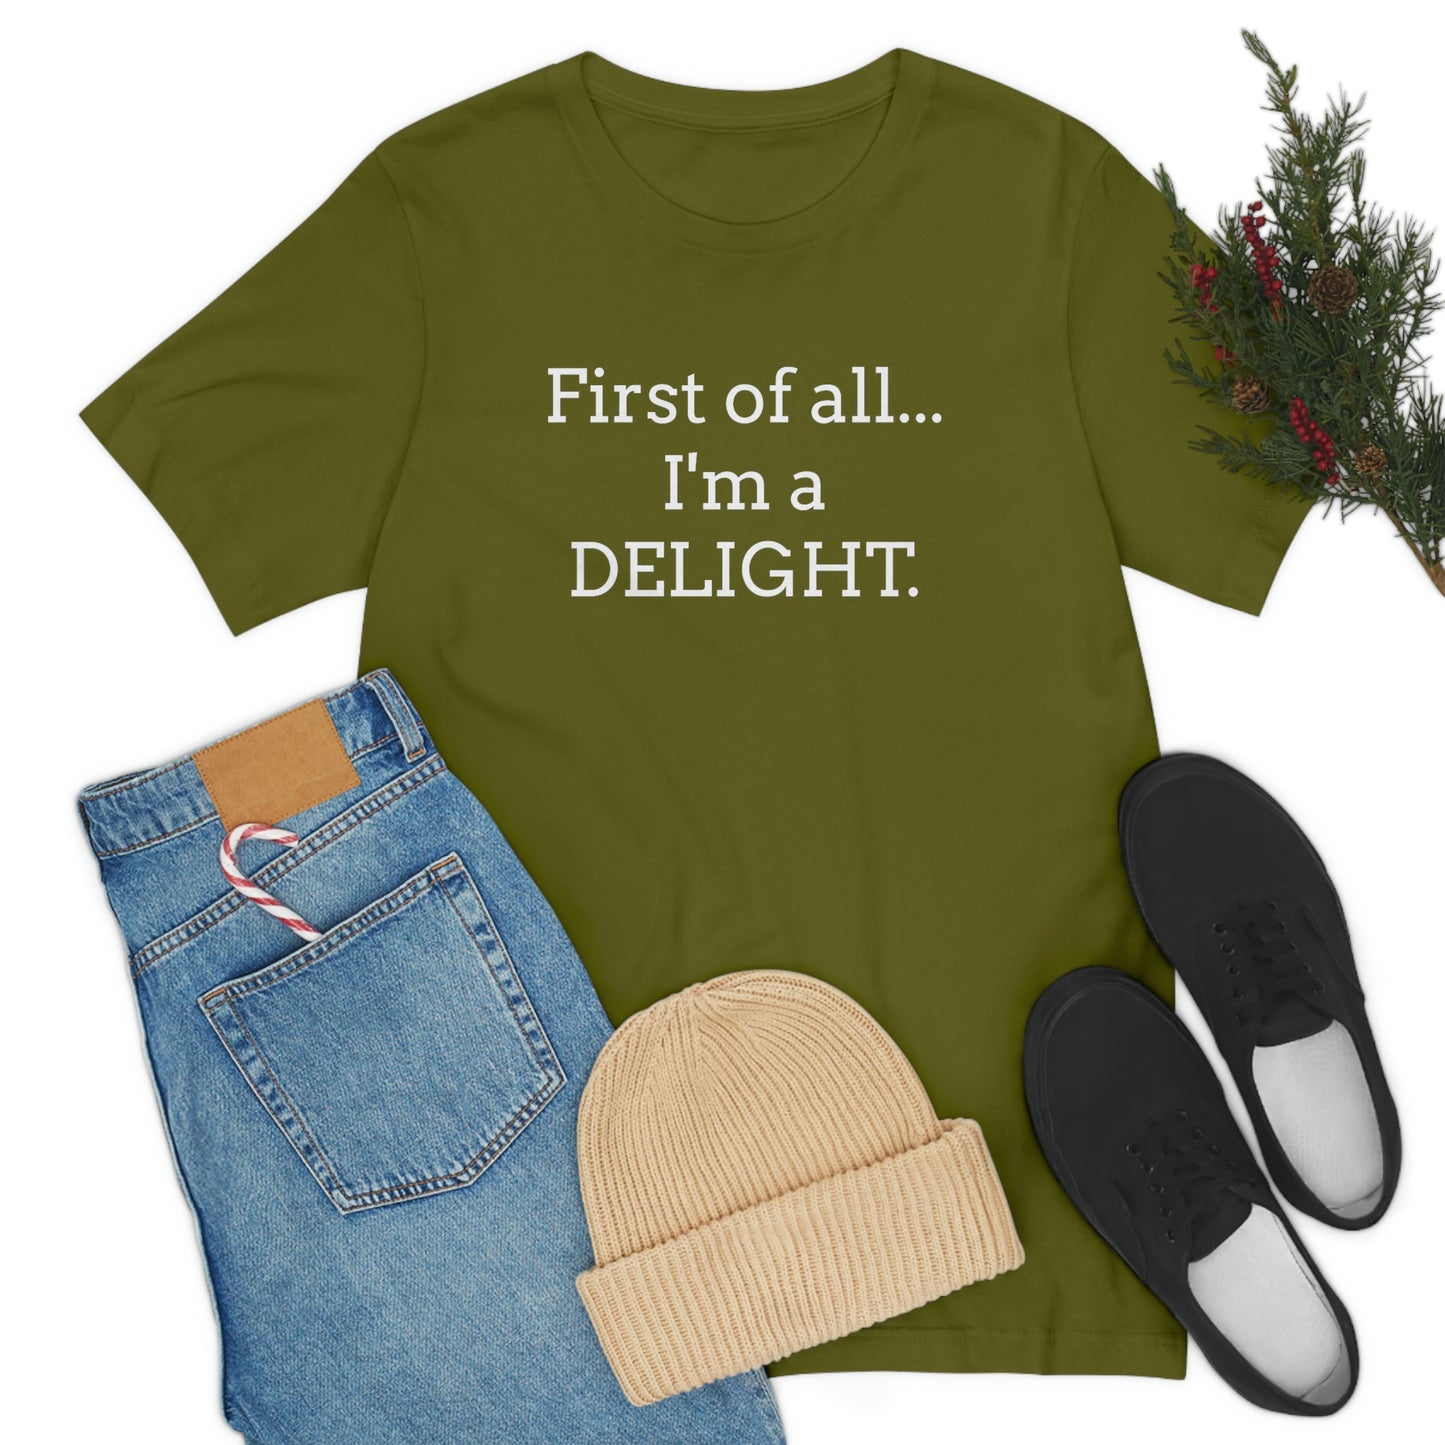 First of all... I'm a DELIGHT, Tshirt